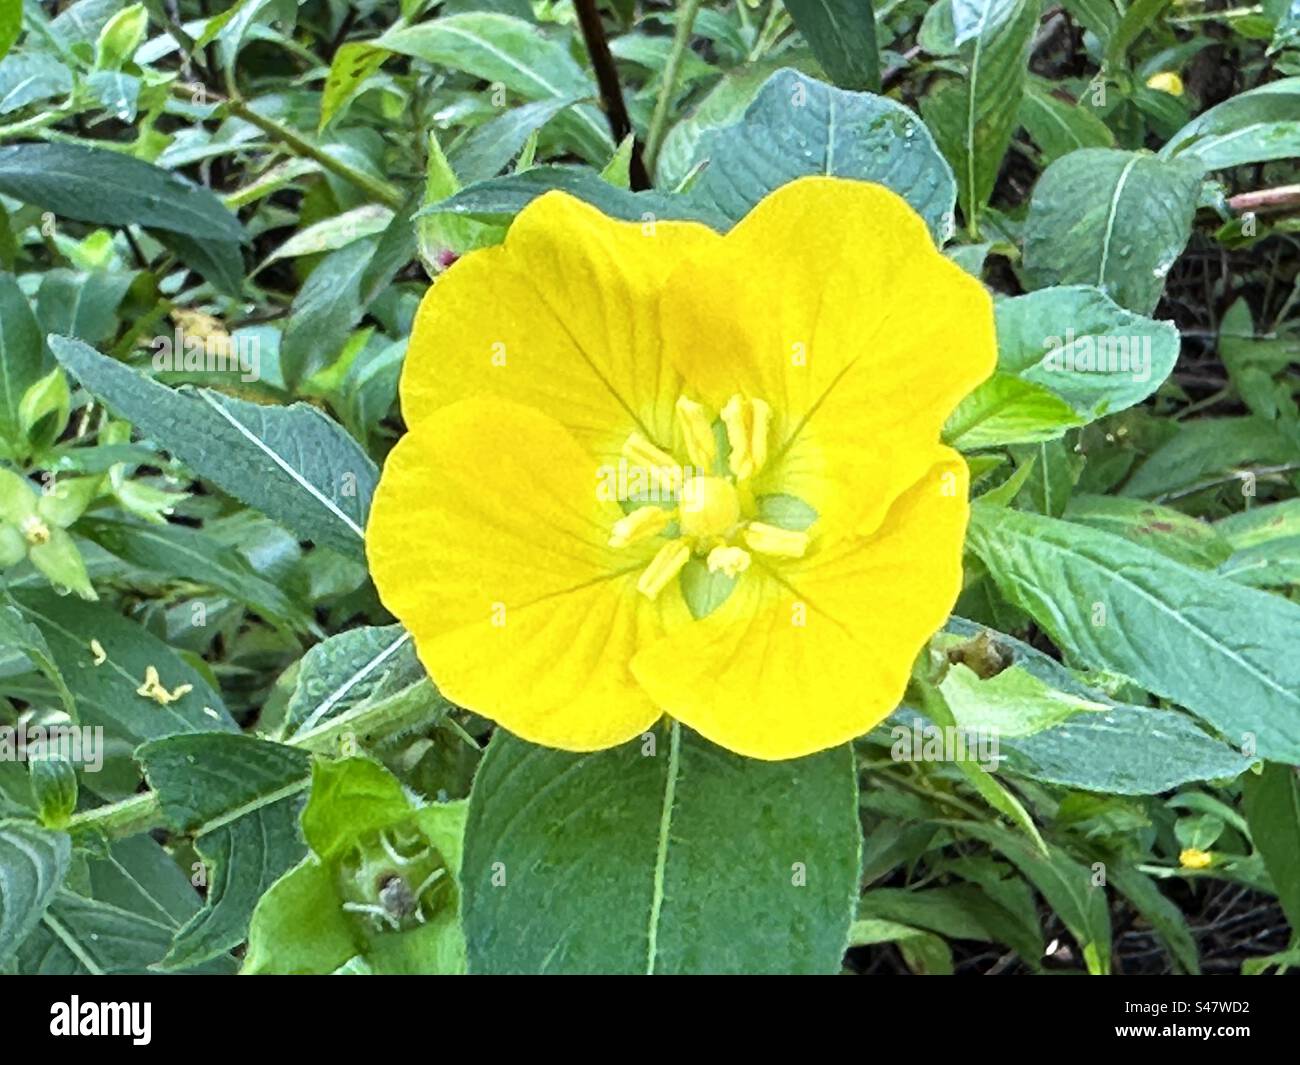 A yellow Ludwigia Peruviana  Flower in a Florida garden. This flower is also known as a Peruvian primrose. Stock Photo